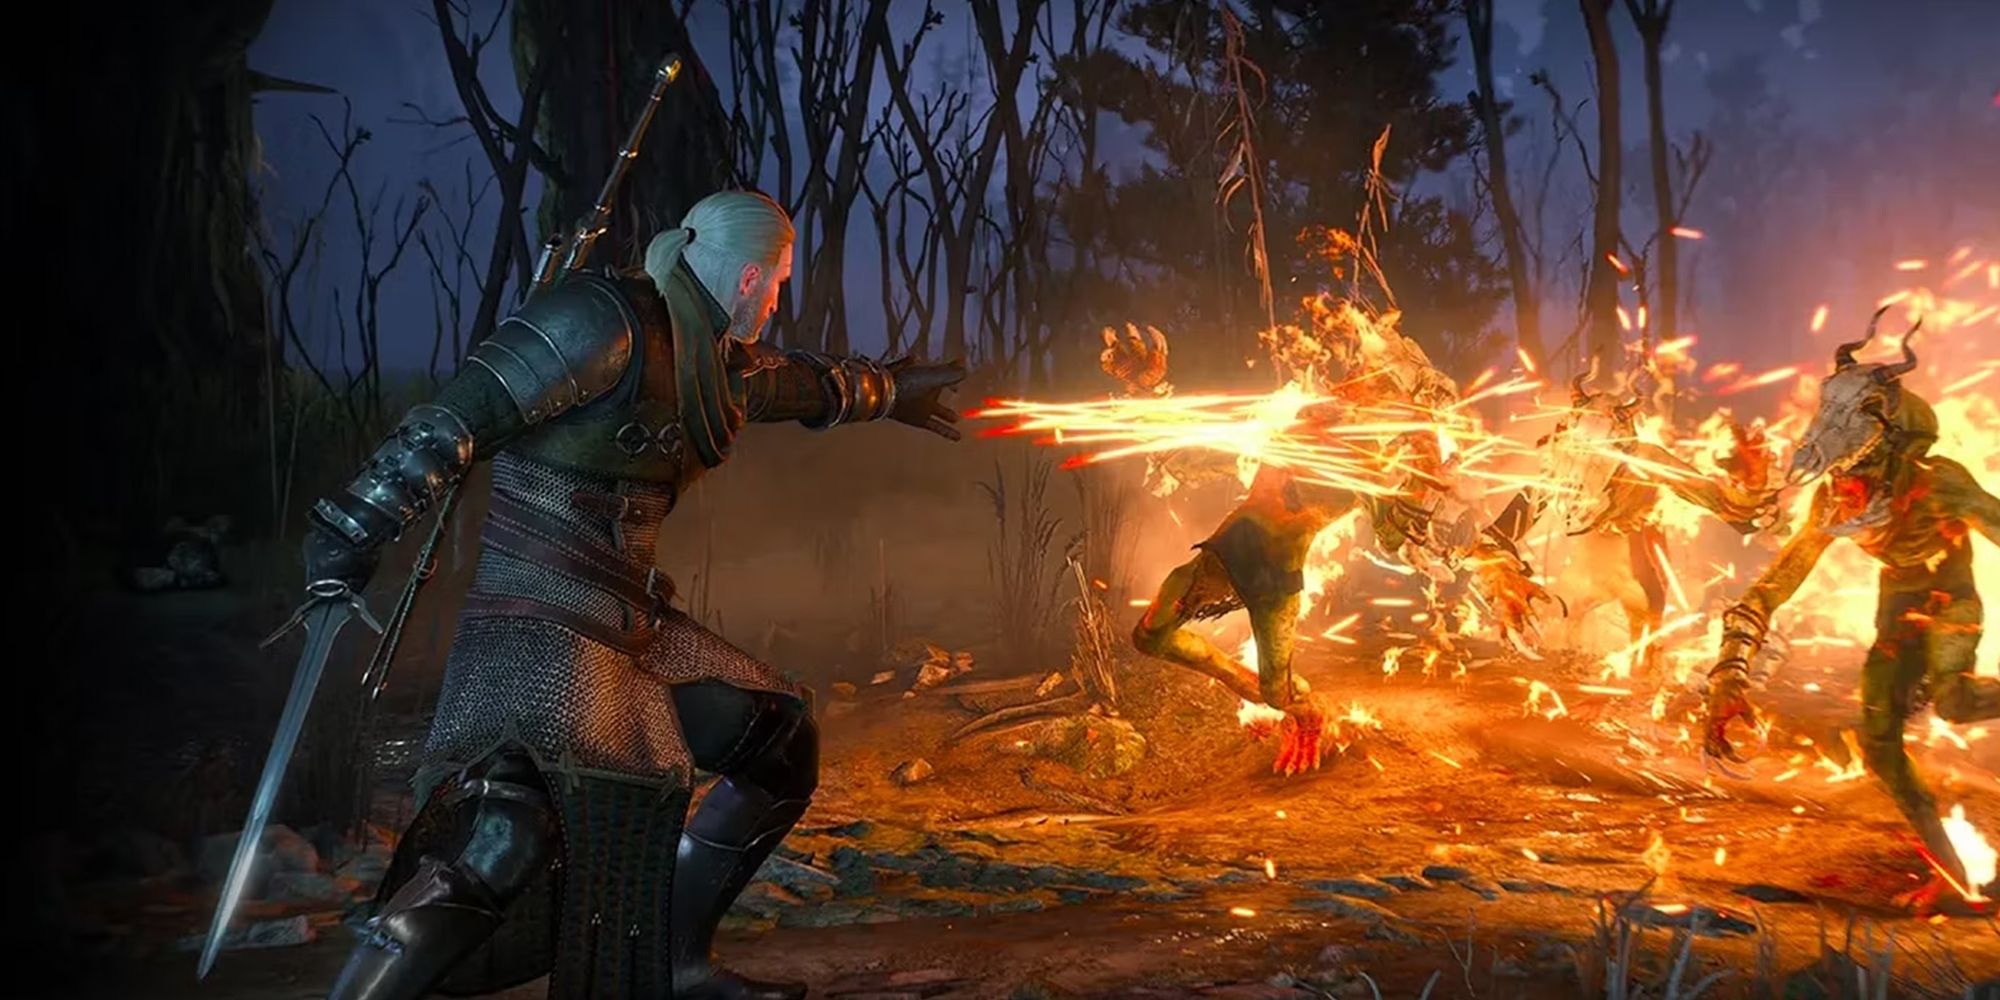 The Witcher 3 - Geralt Using Agni On A Group Of Enemies